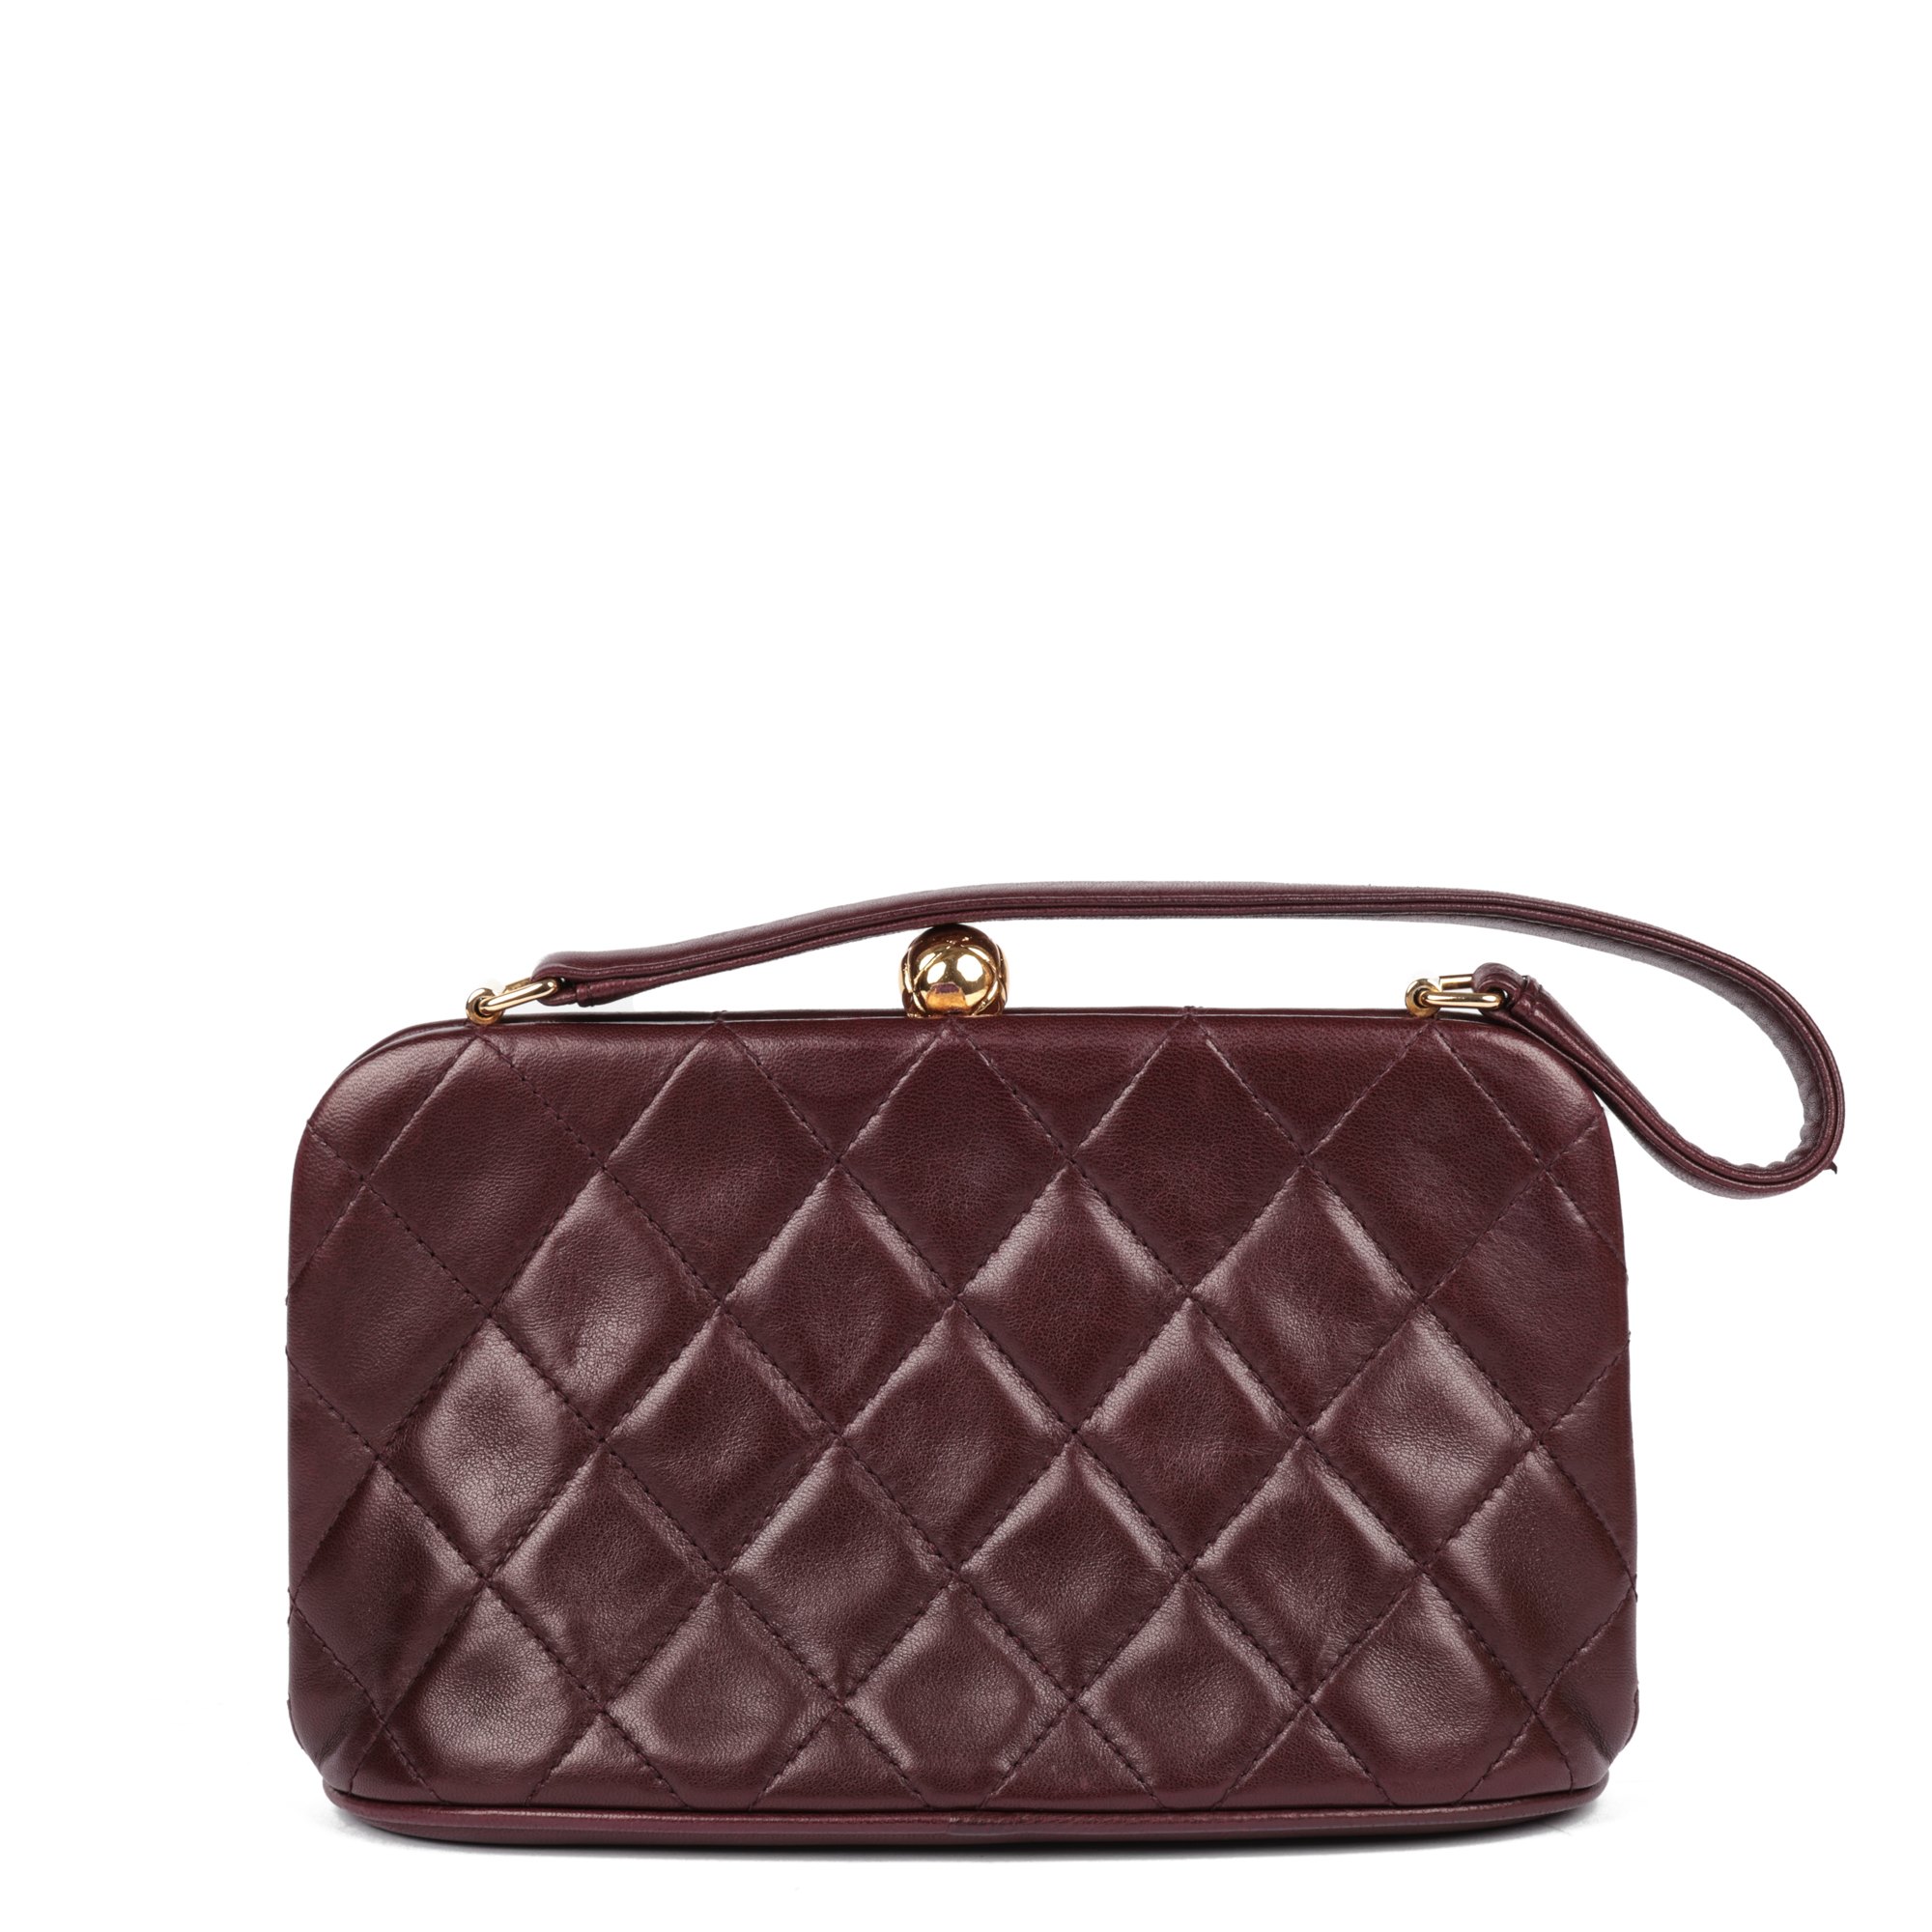 Chanel Burgundy Quilted Lambskin Timeless Top Handle Frame Bag